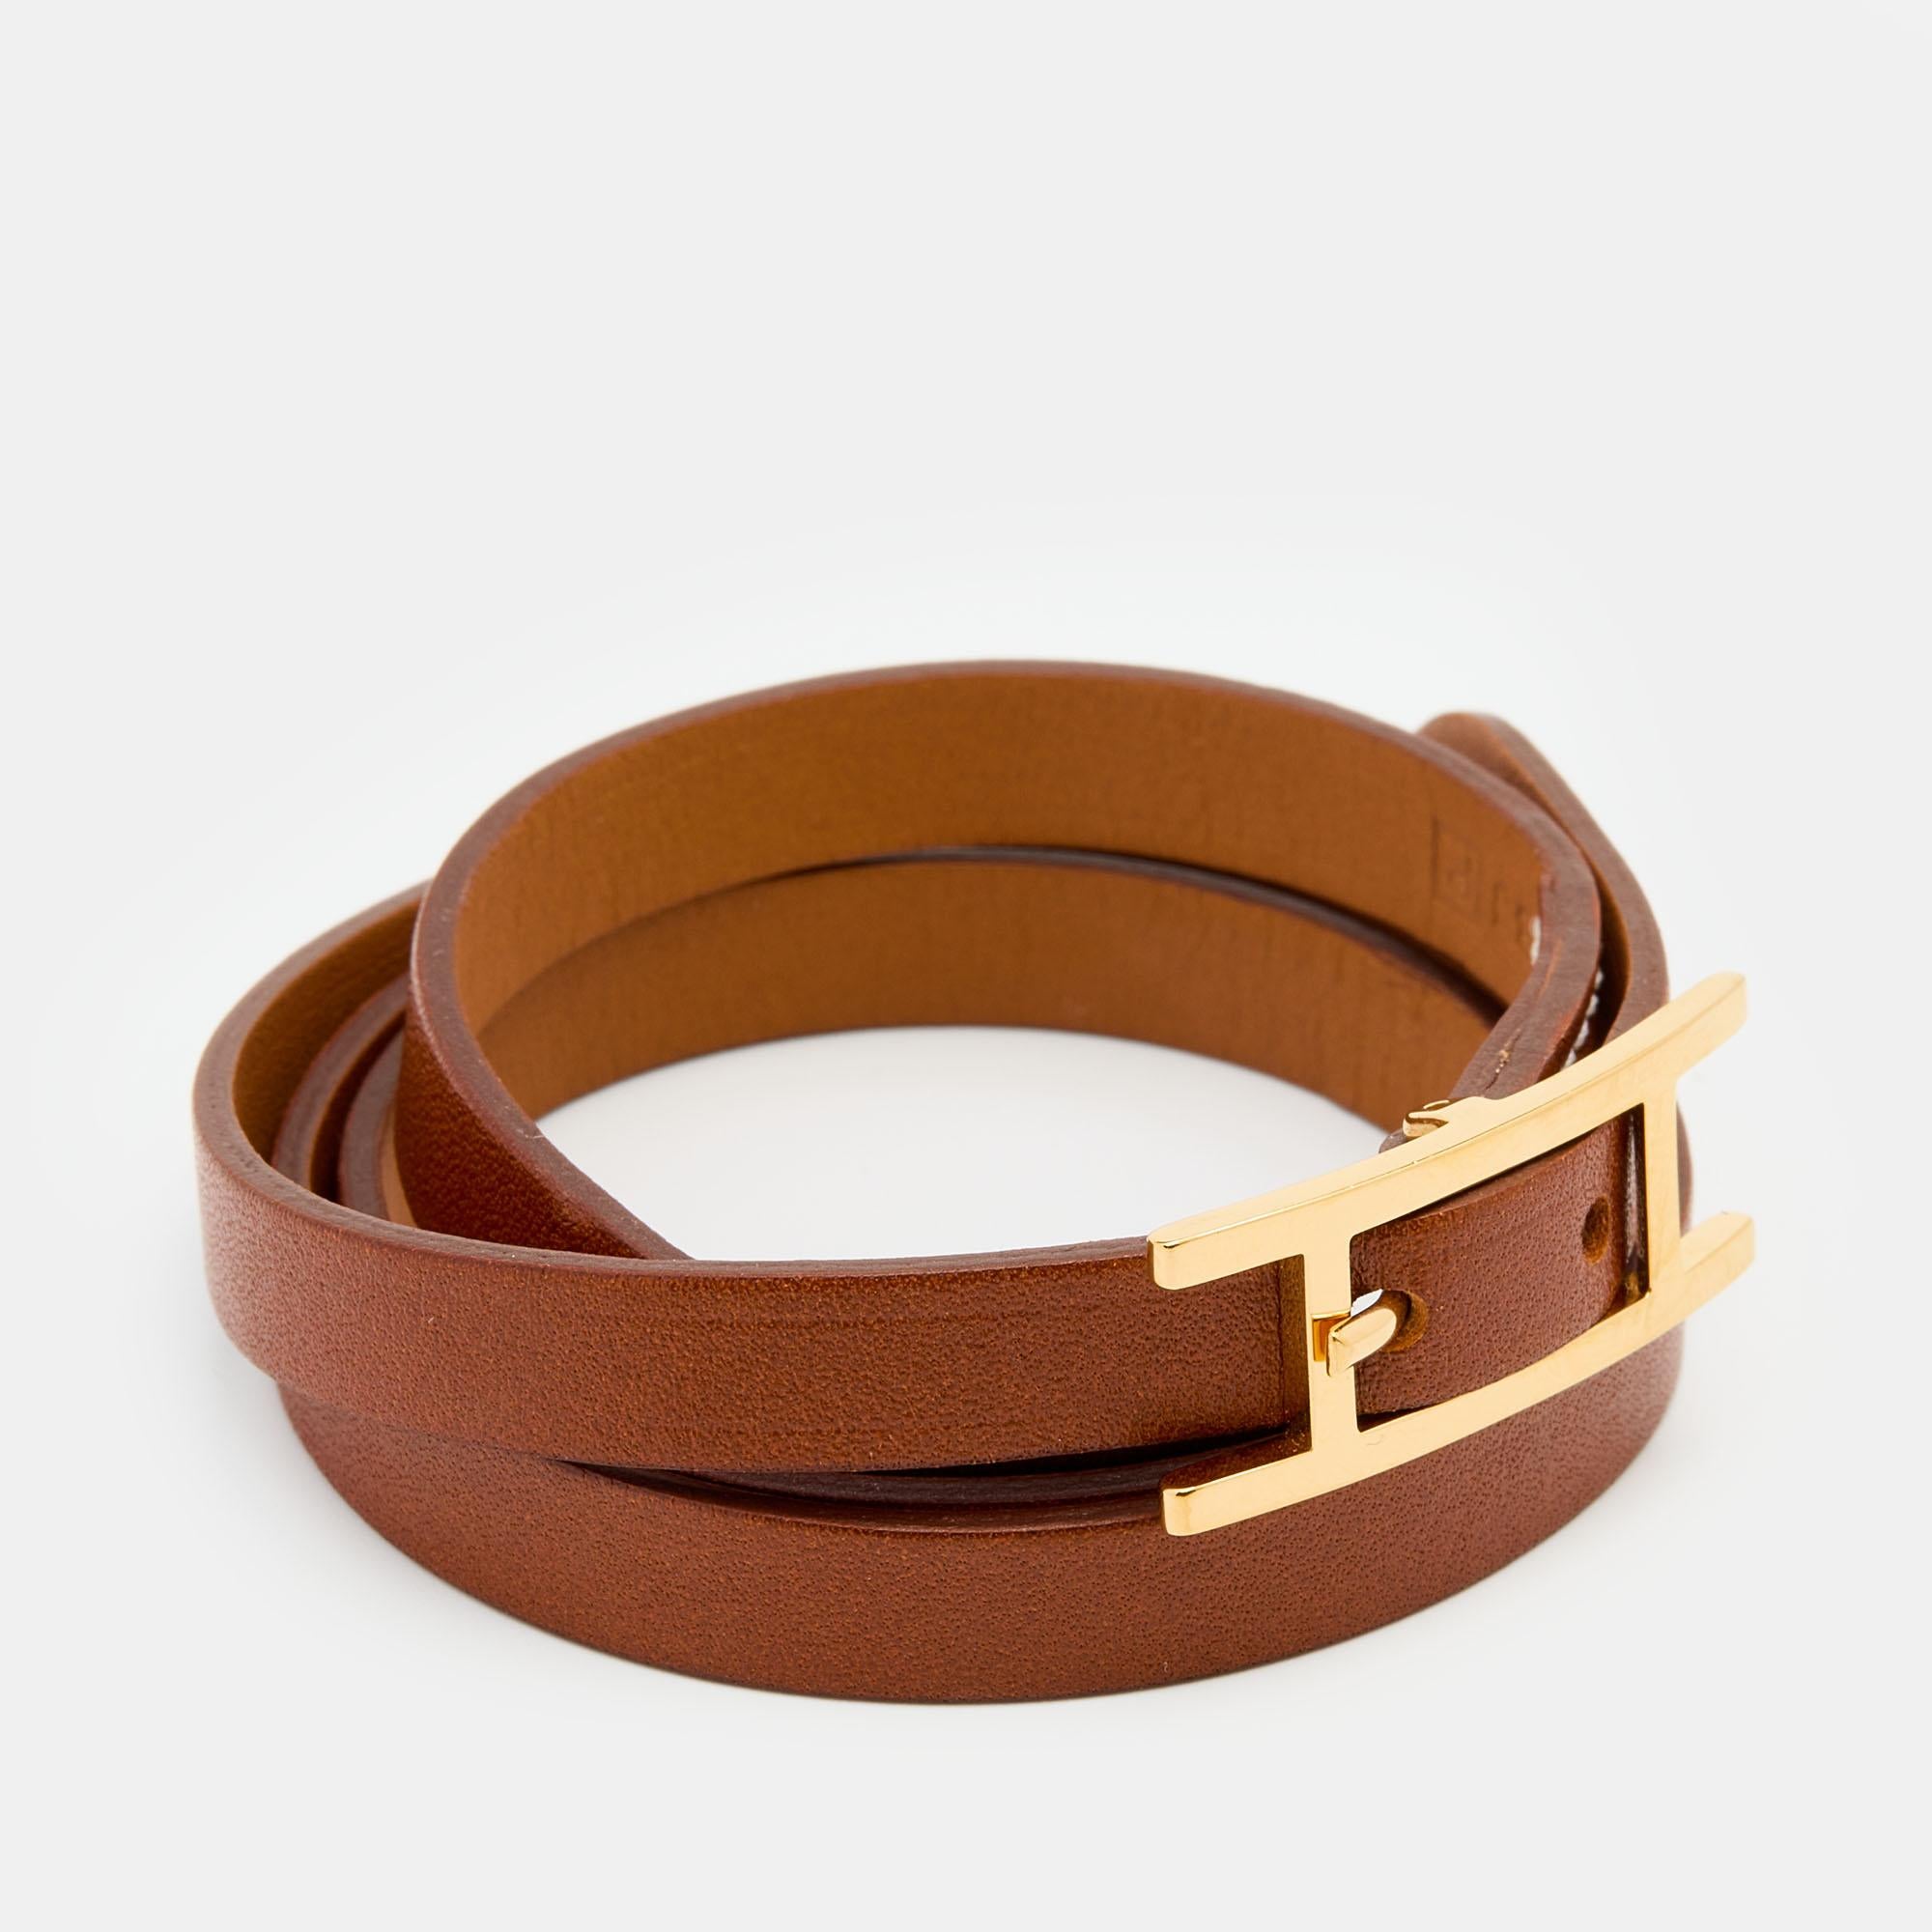 This Hermès Double Tour bracelet is a chic accessory that can be paired with everything, from casuals to evening outfits. Made from leather, it is beautified with an H buckle in gold-tone metal. The bracelet has a long strap that wraps around your